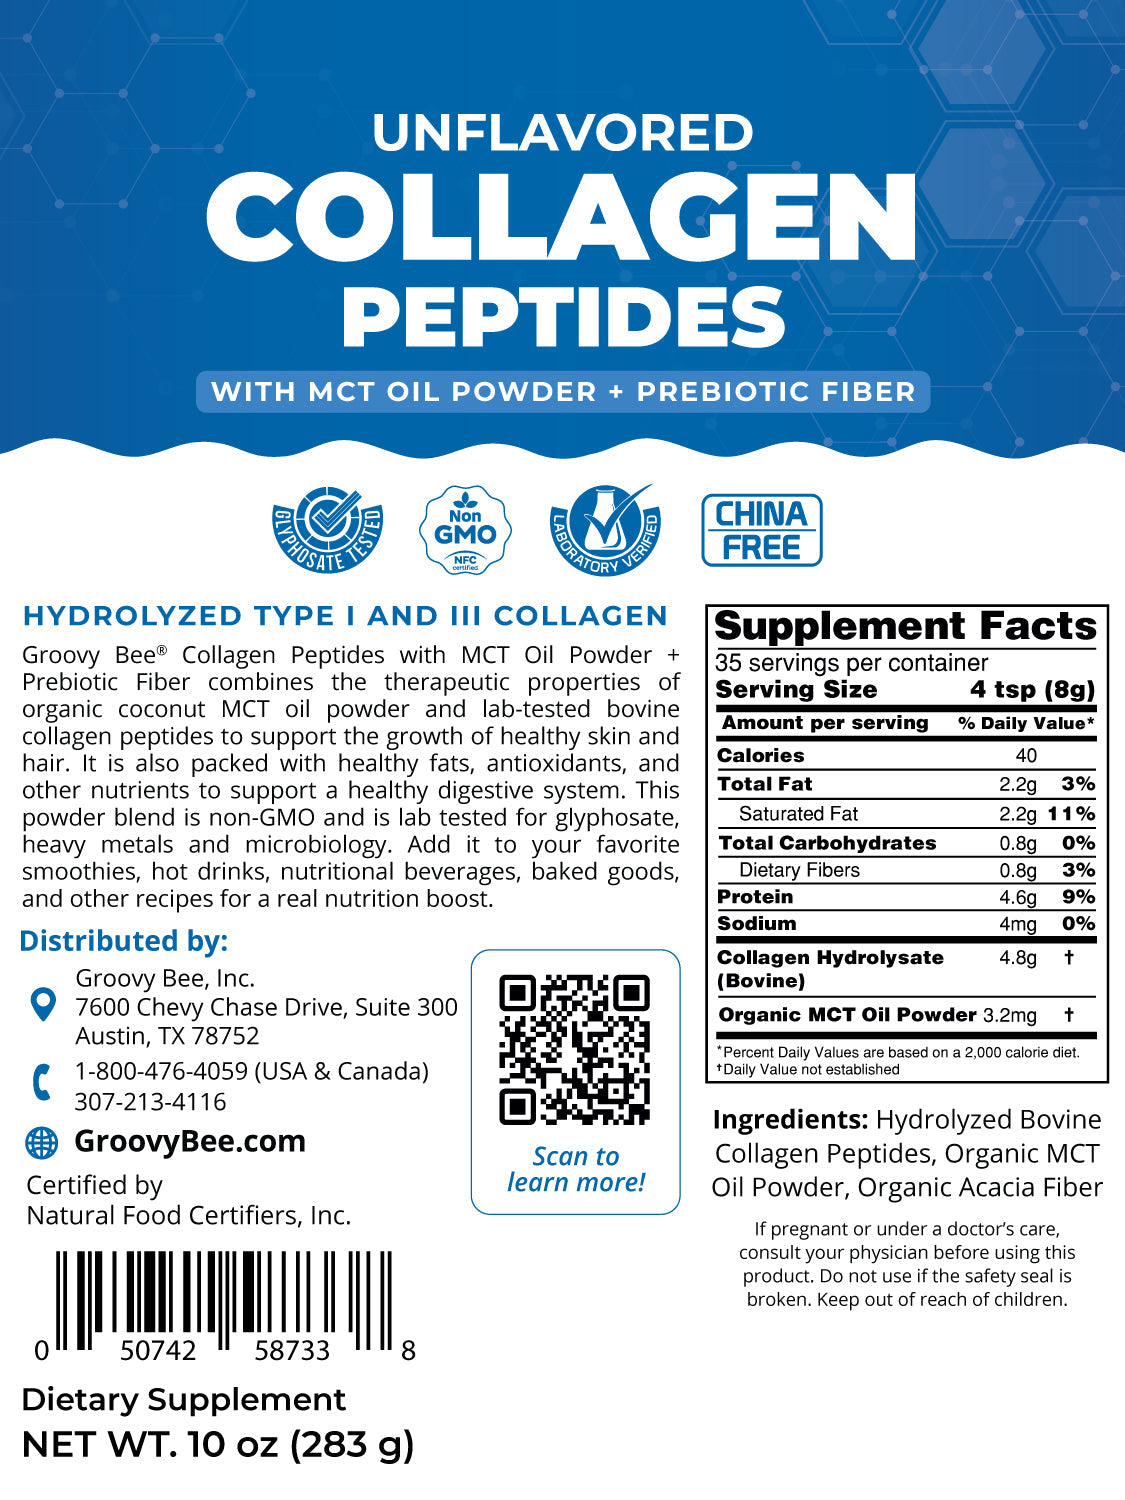 Collagen Peptides + MCT with Prebiotic Fiber - Unflavored 10 oz (283g) (6-Pack)